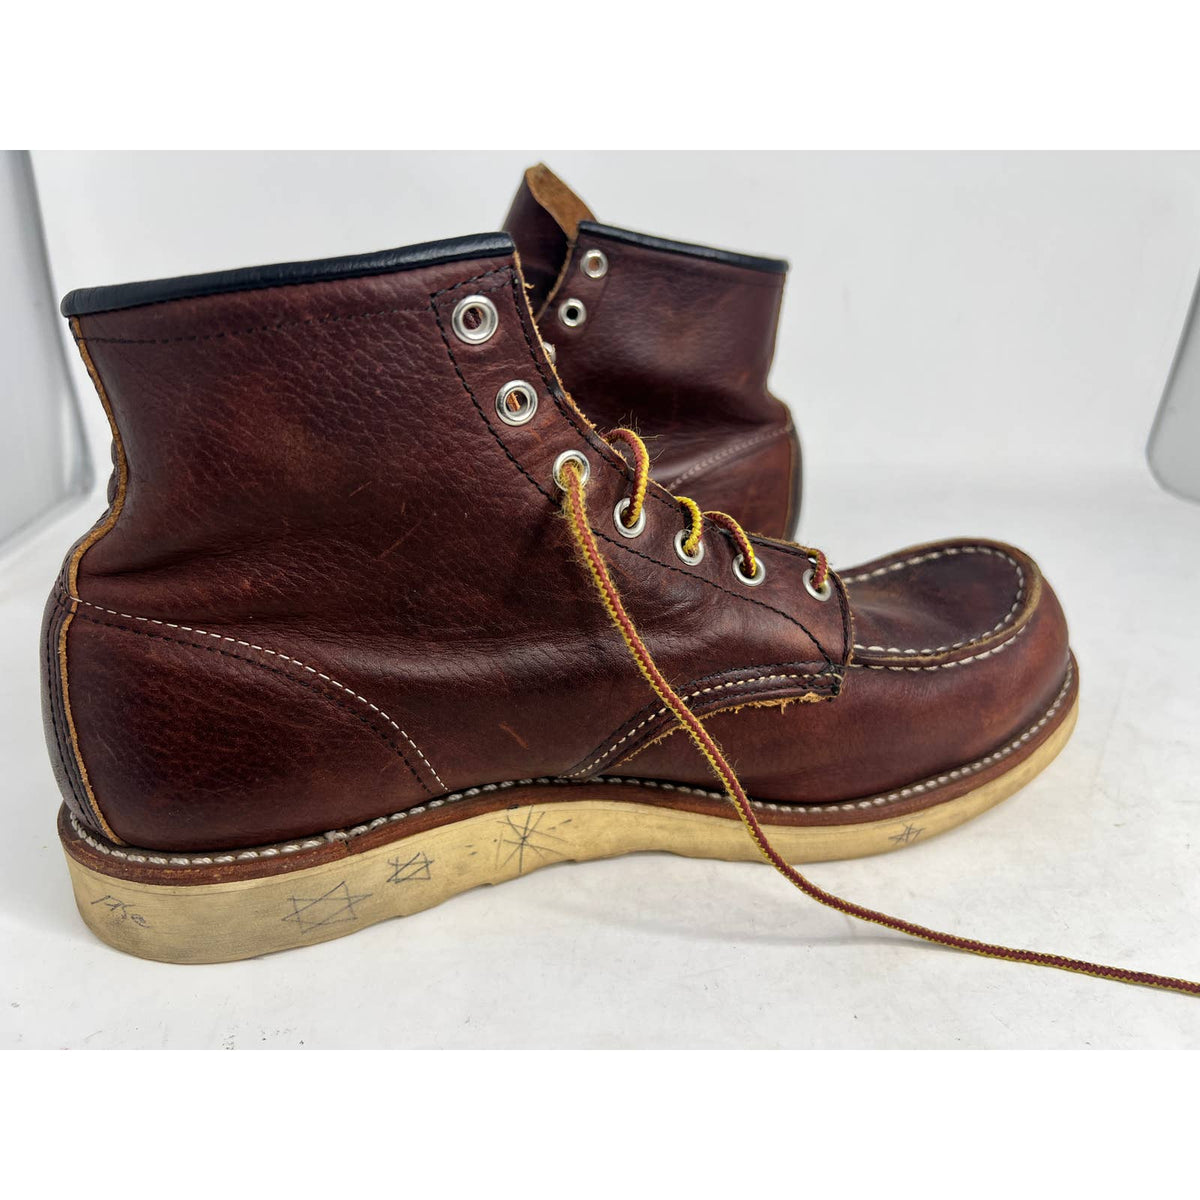 Red Wing 8138 Boots Sz.11 D